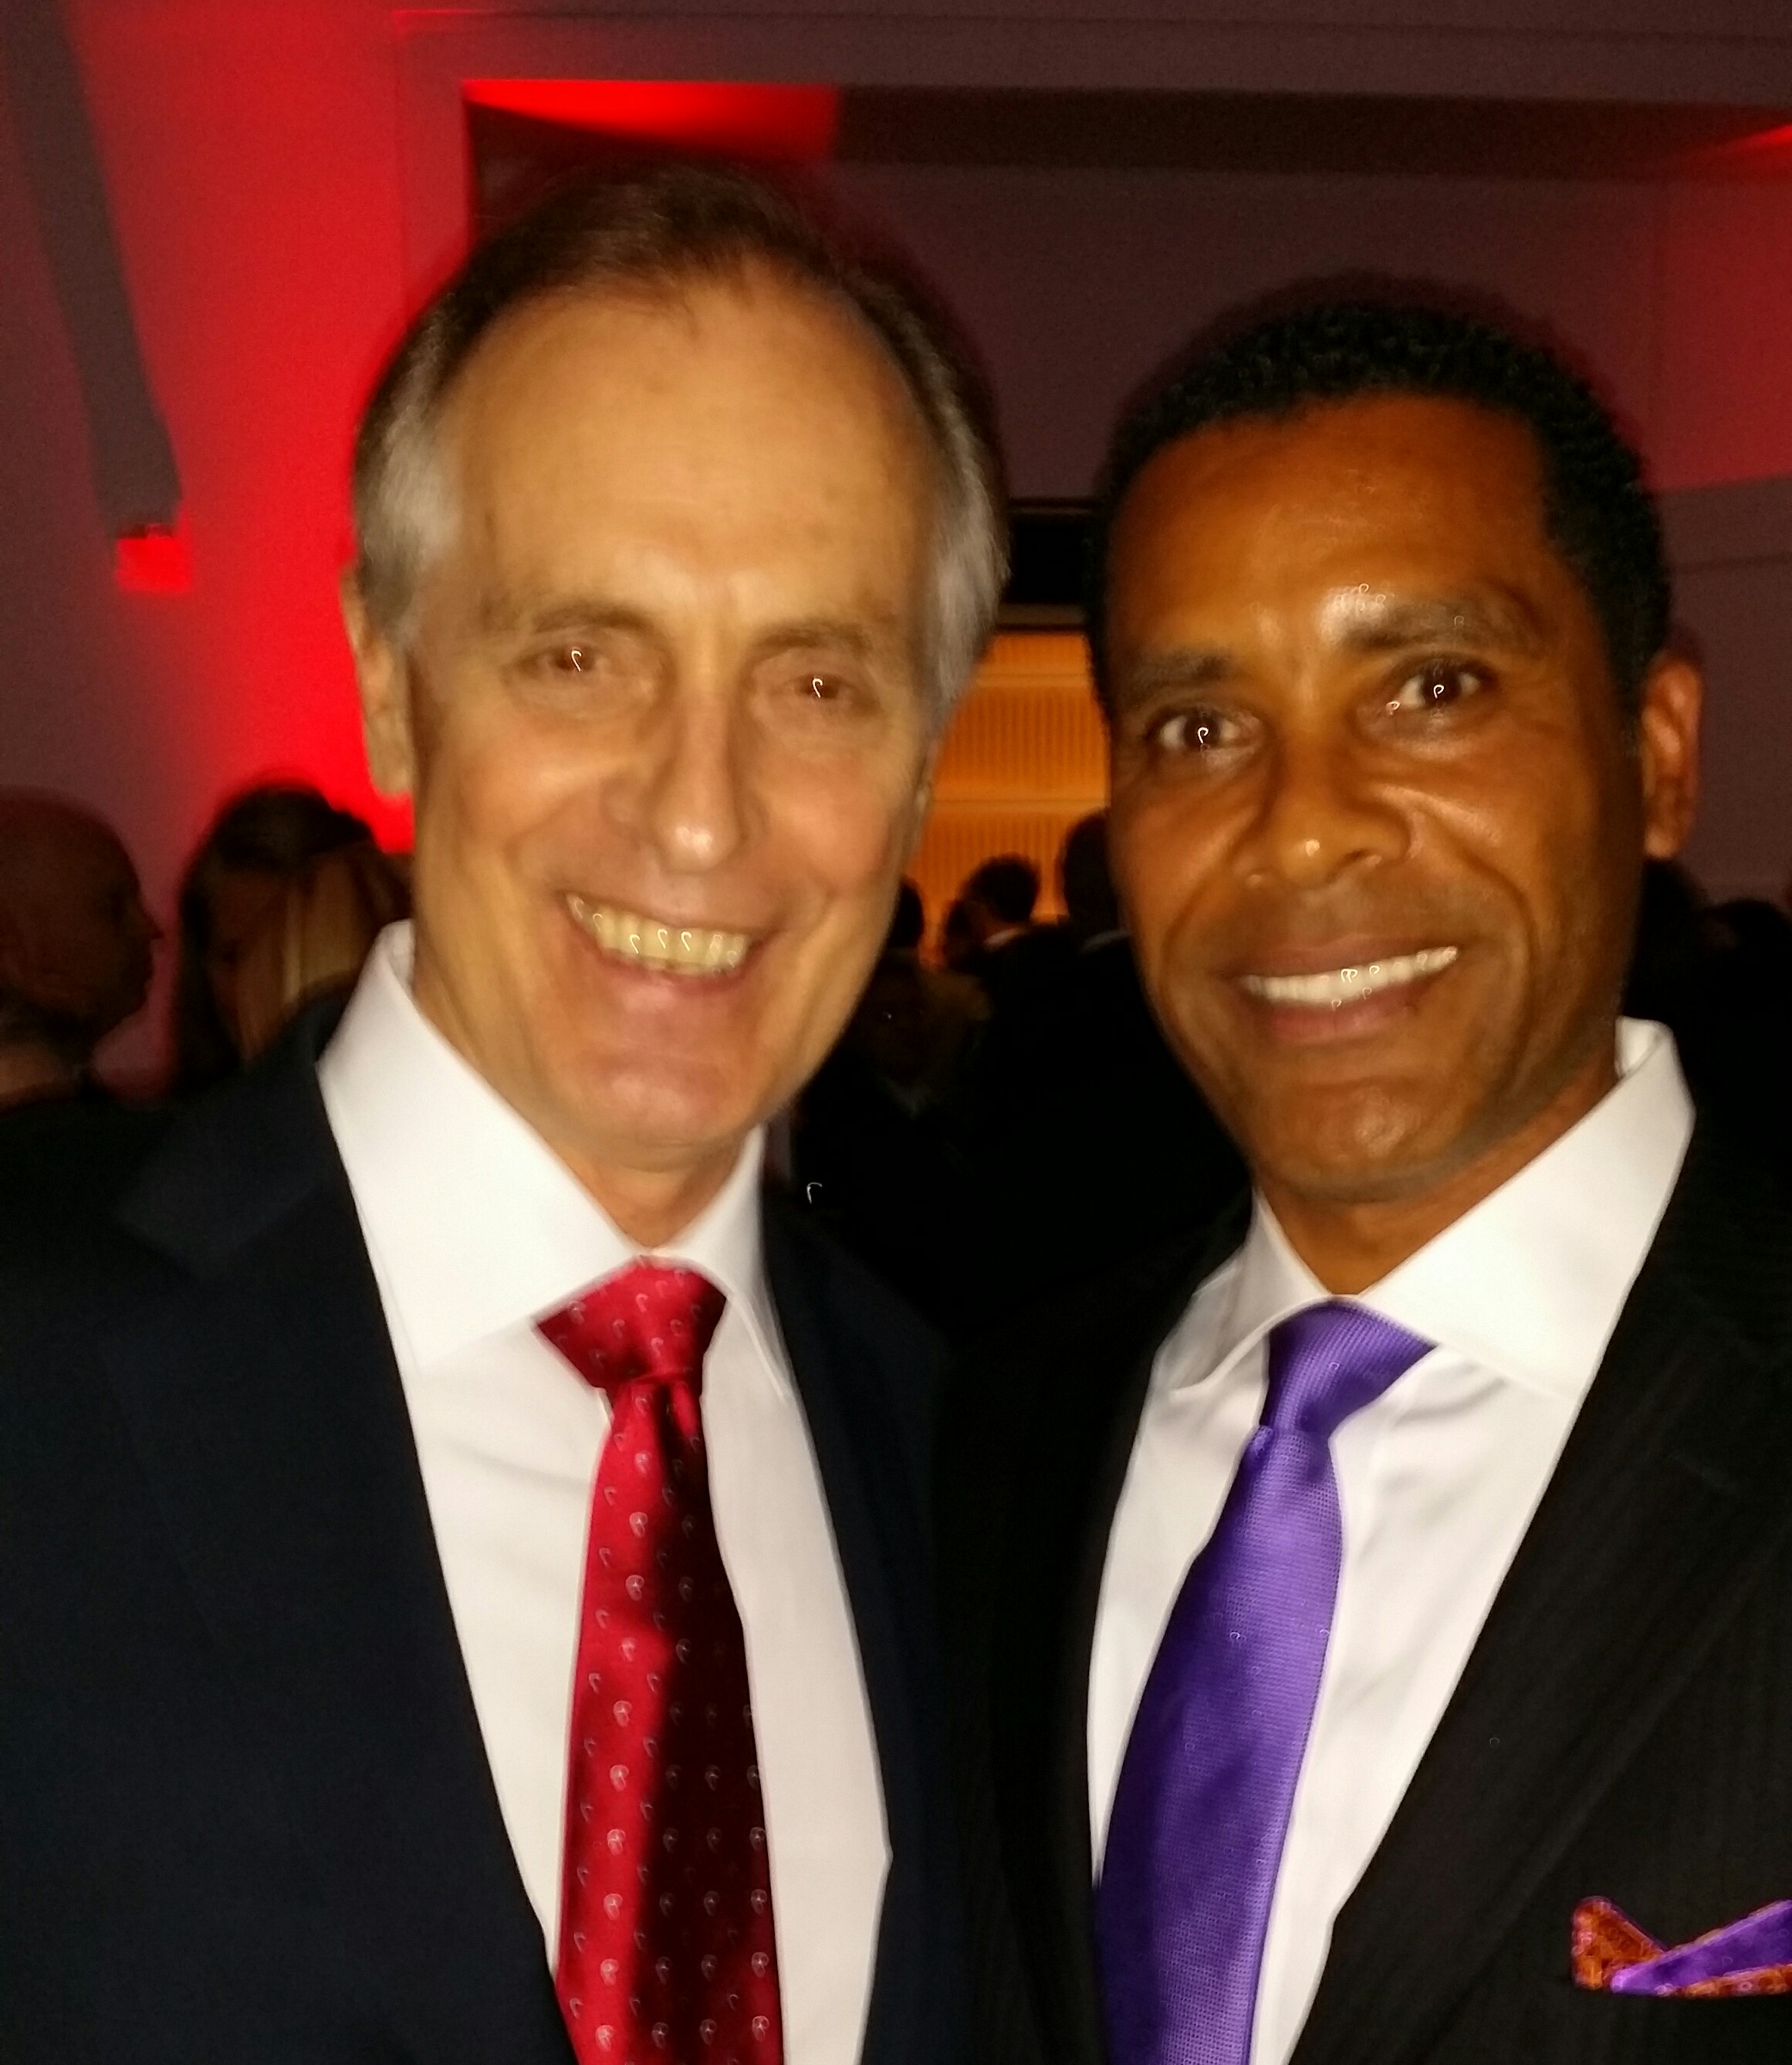 Actor Lamont Easter with Actor Keith Carradine at the Washington DC screening of the CBS show Madam Secretary.